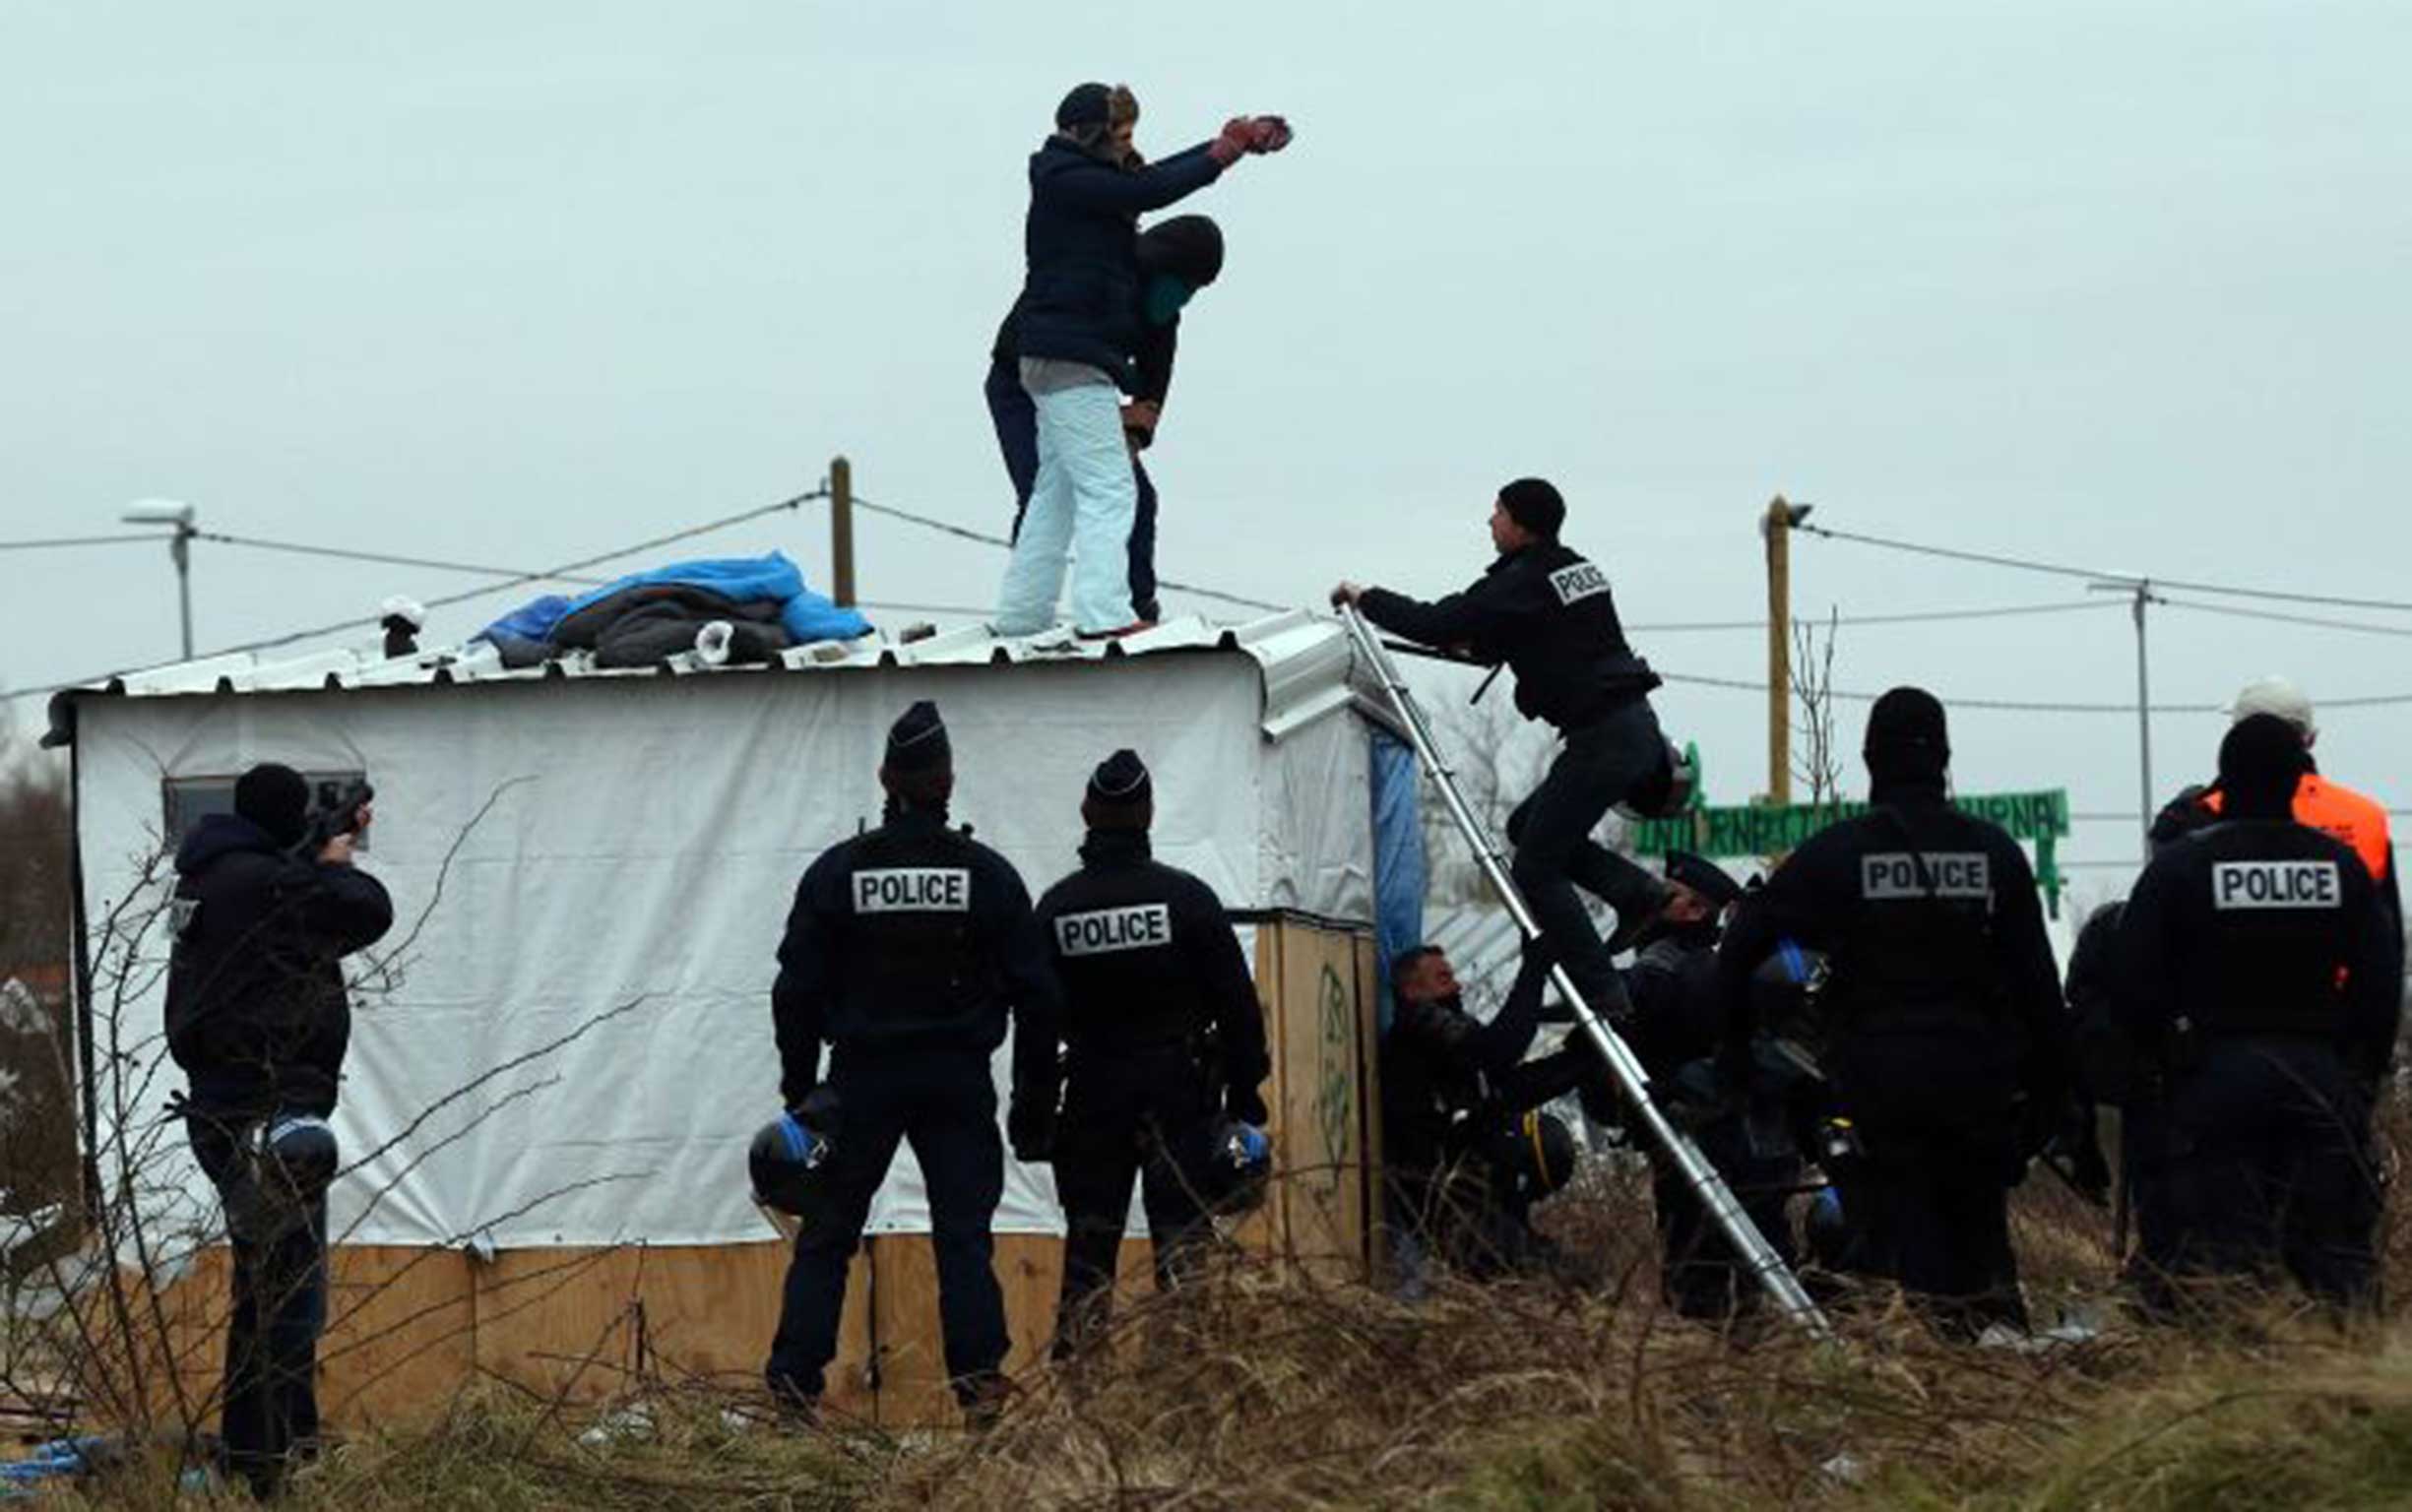 French police prepare to remove a woman, who threatened to cut her wrists, and a man from the top of a hut as they clear the Jungle camp in Calais